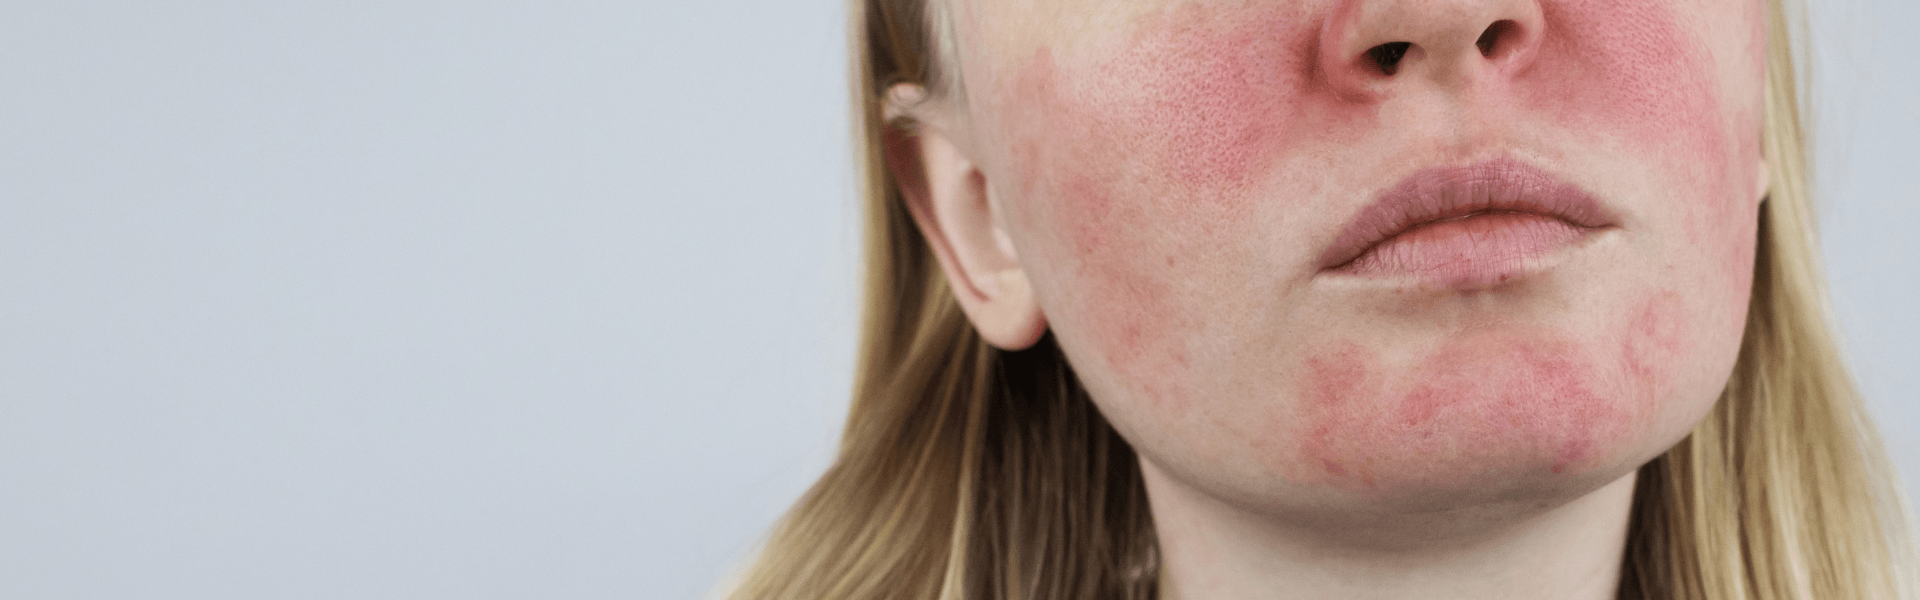 red bumps on face